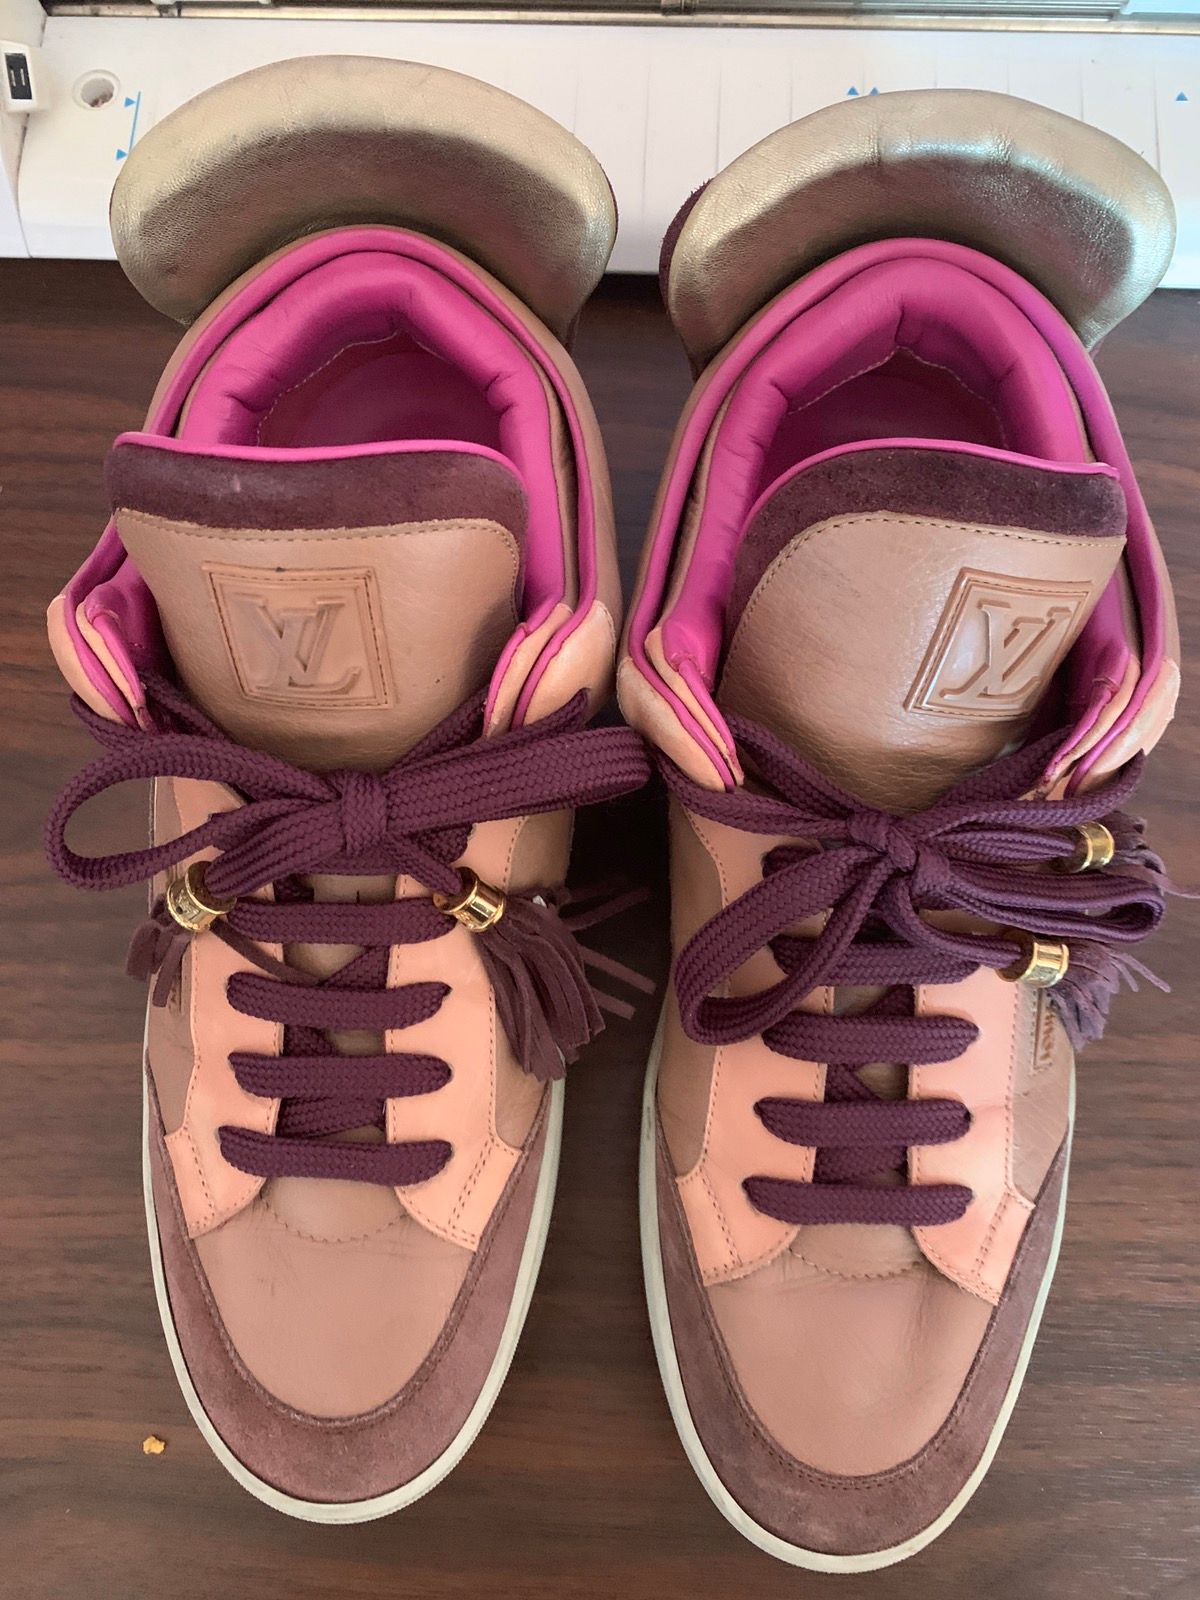 Louis Vuitton Kanye West Patchwork Don 🔥 Lv 8.5 (fits like a us 10) with  Og all Clean condition $2,675